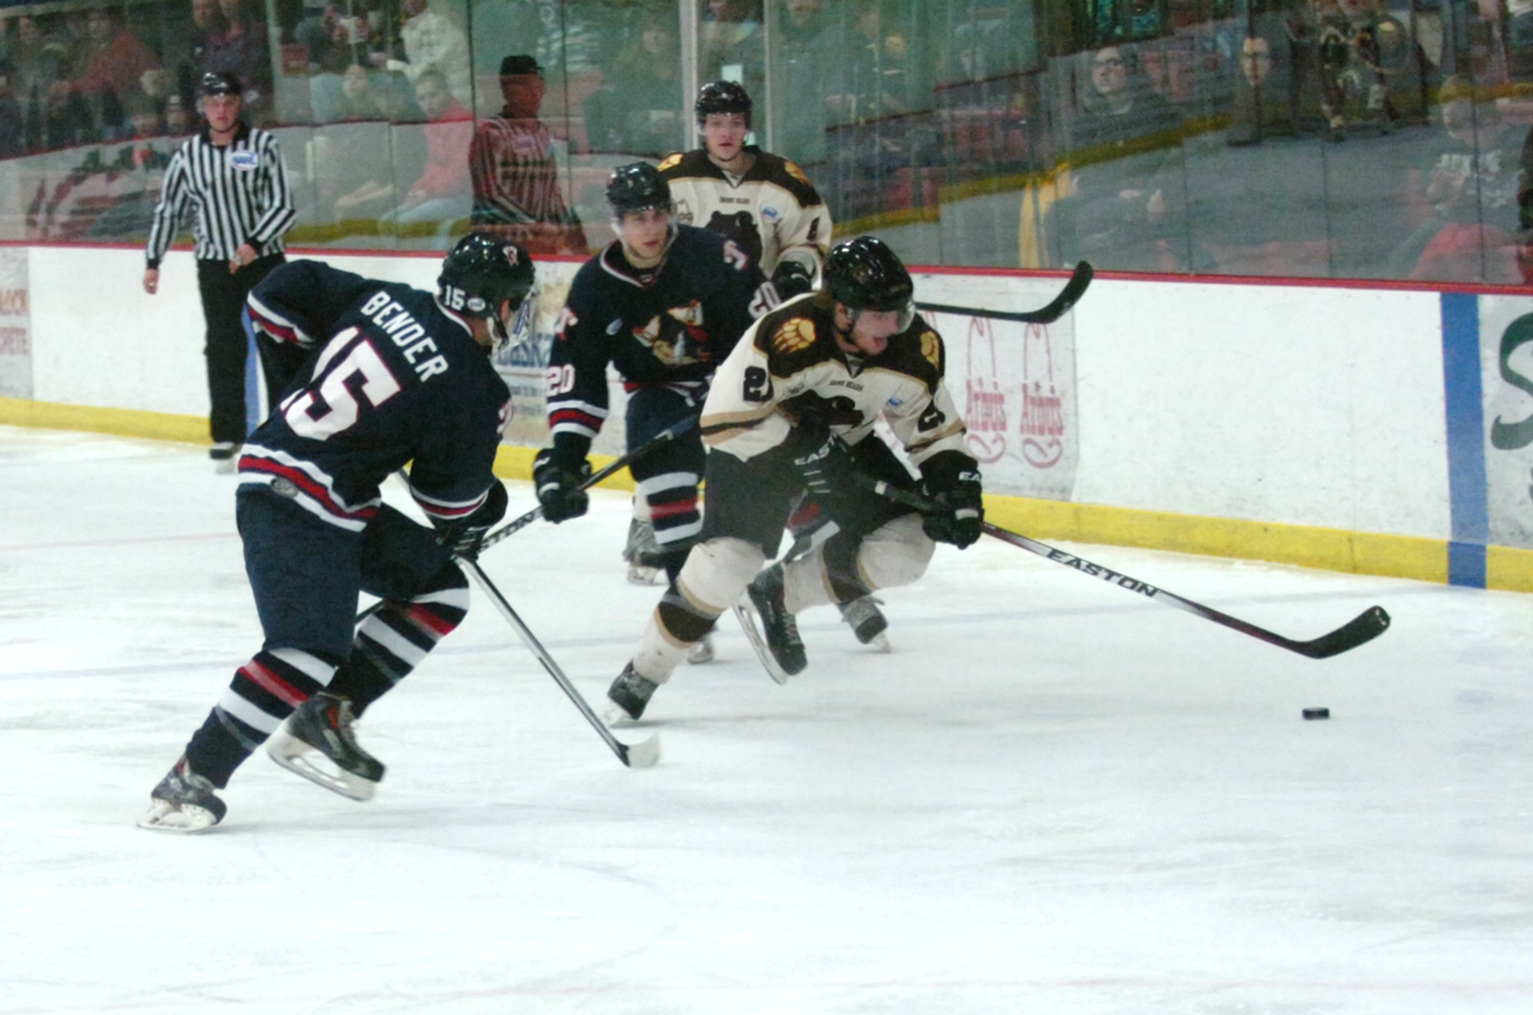 Saturday: Brown Bears clash with Tomahawks in OT